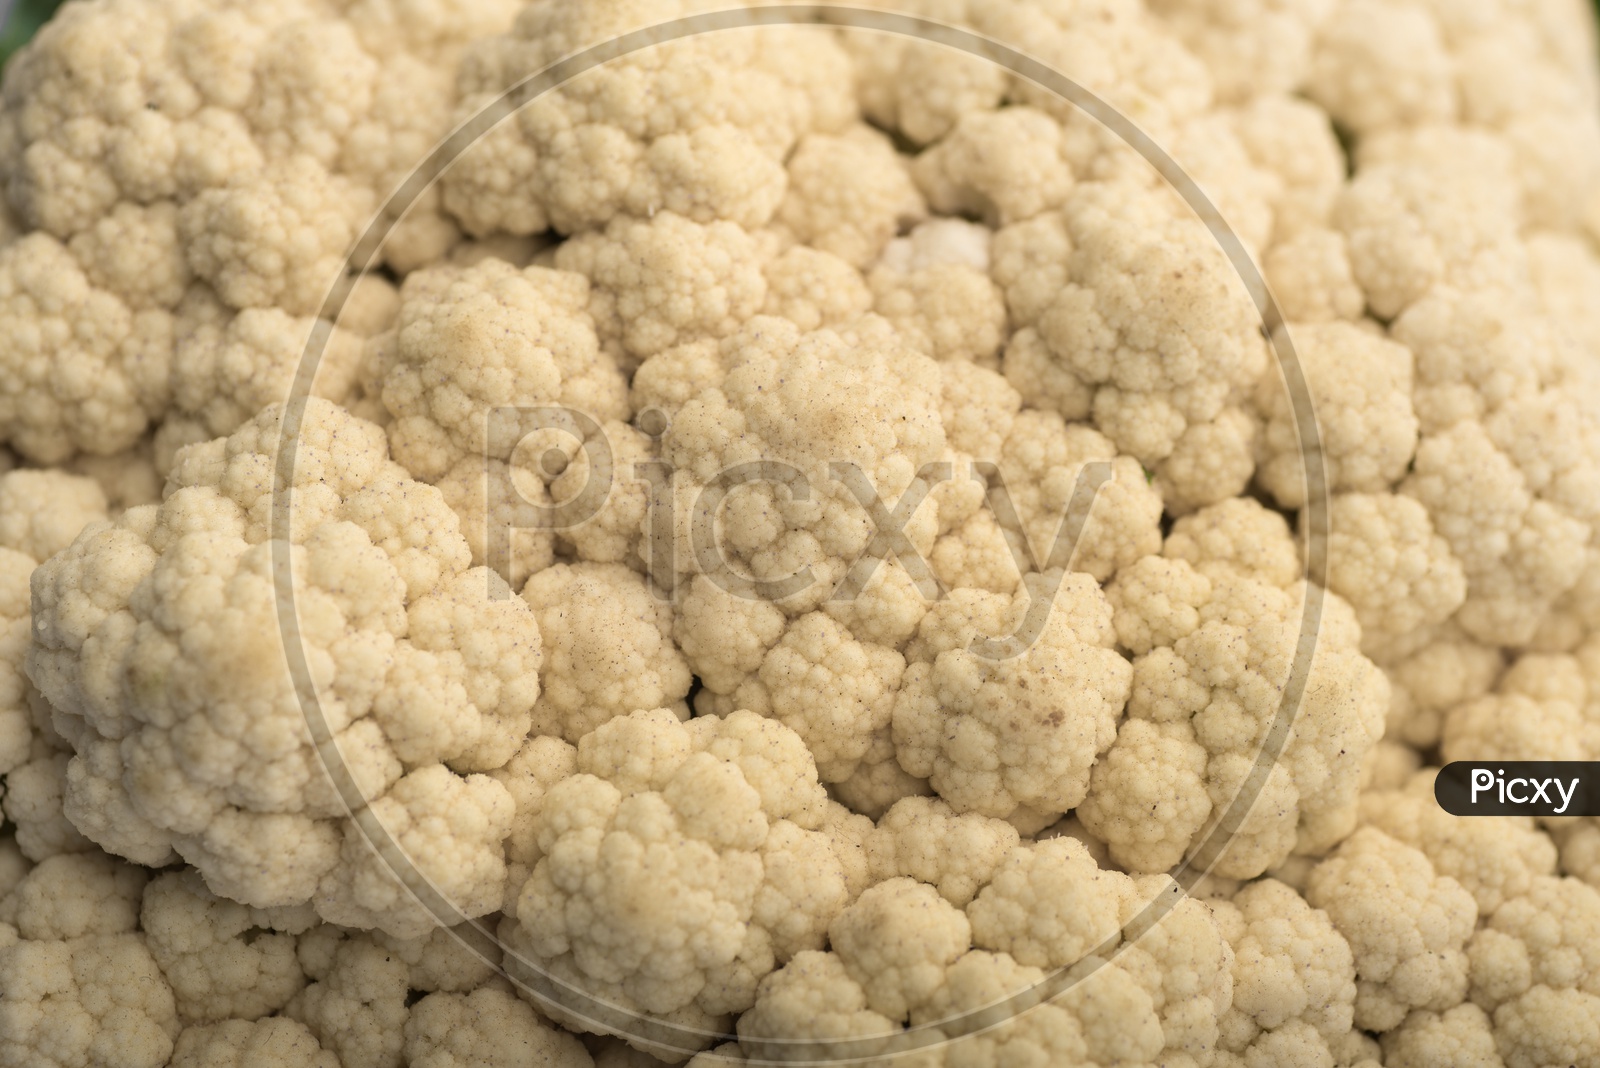 Cauliflower Vegetable Isolated On an White Background